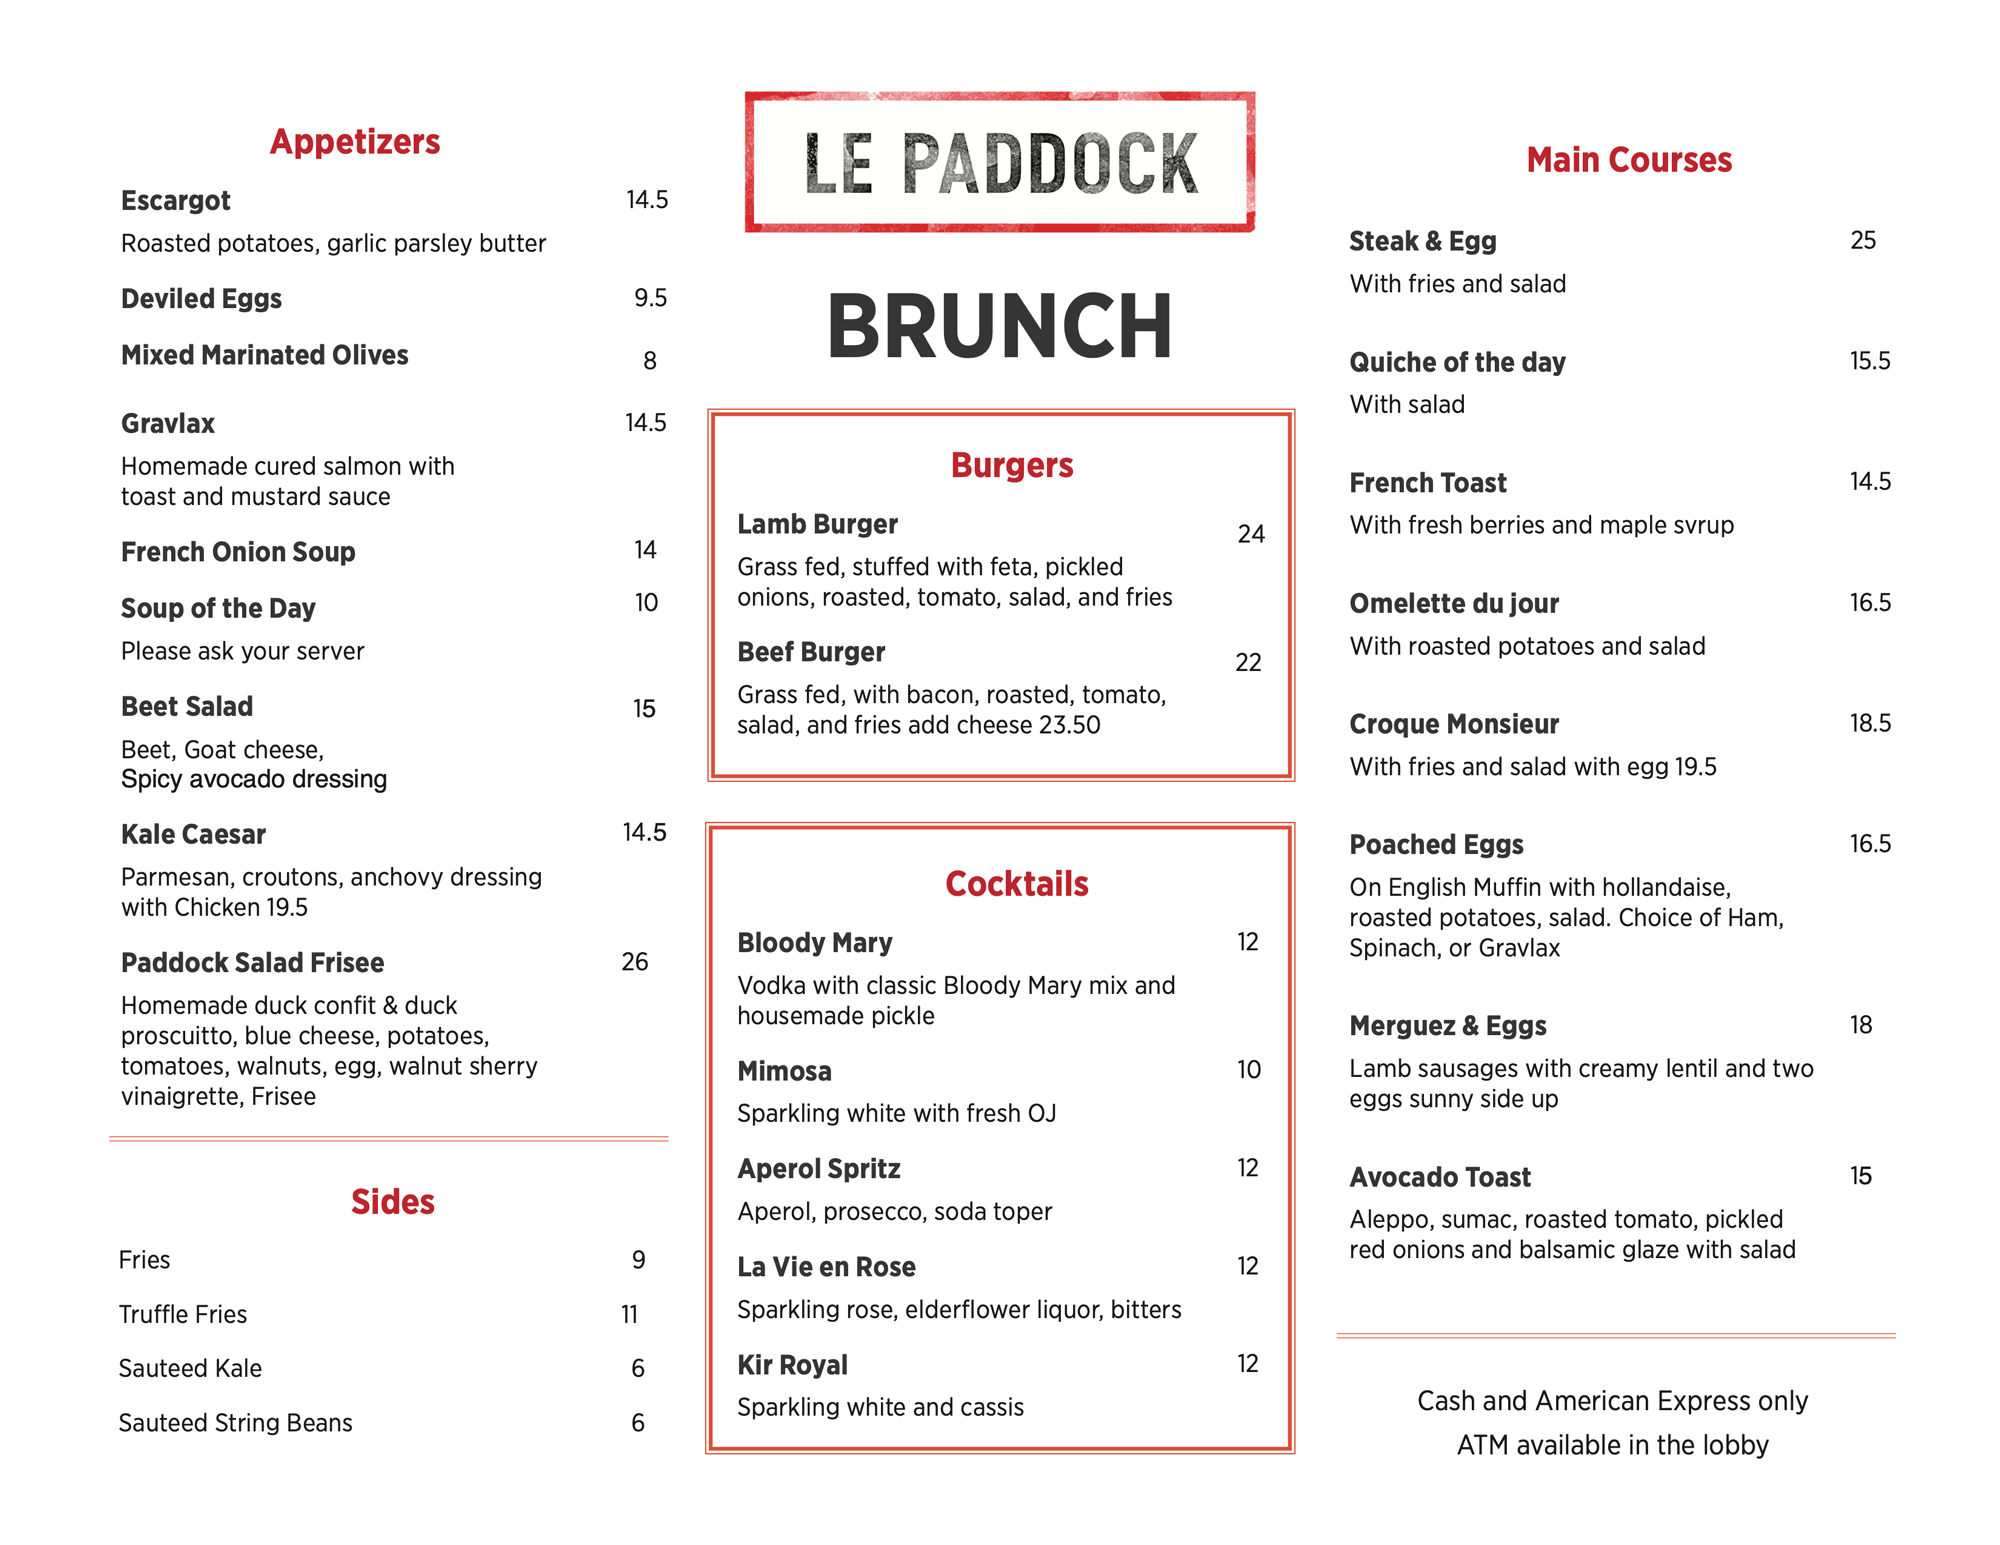 Here is our Brunch menu